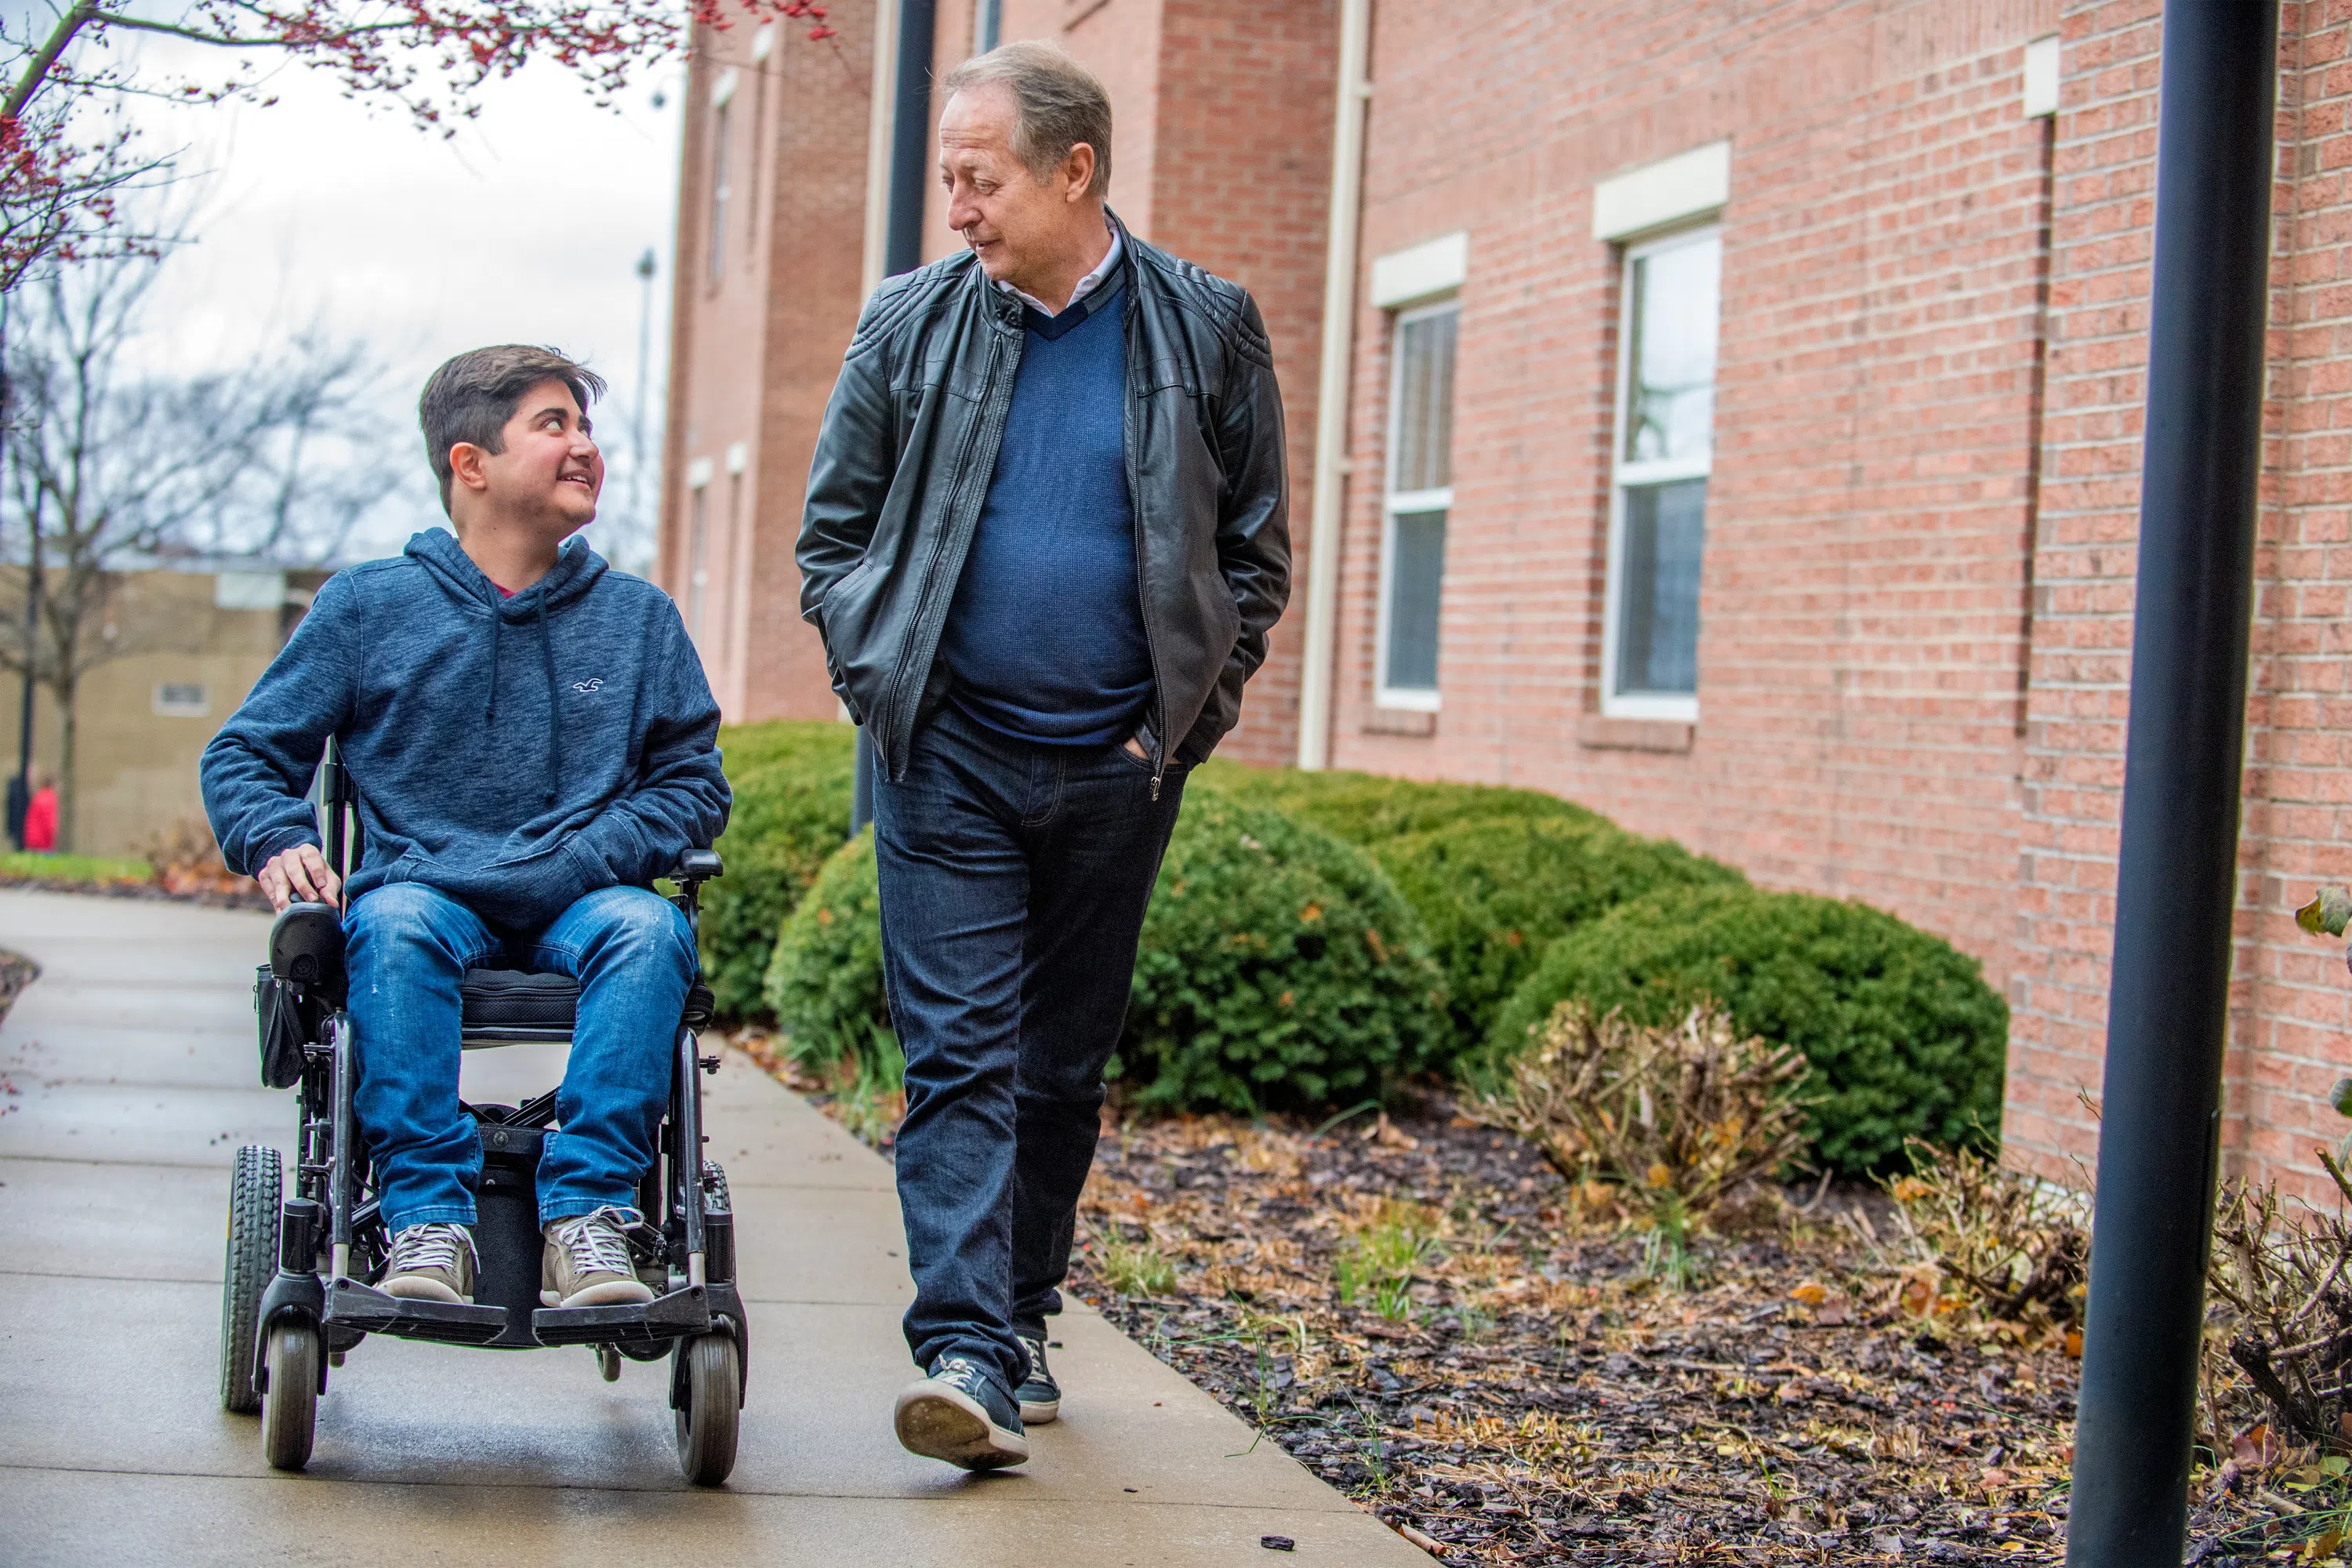 A student in a wheelchair and a man pictured on the sidewalk.